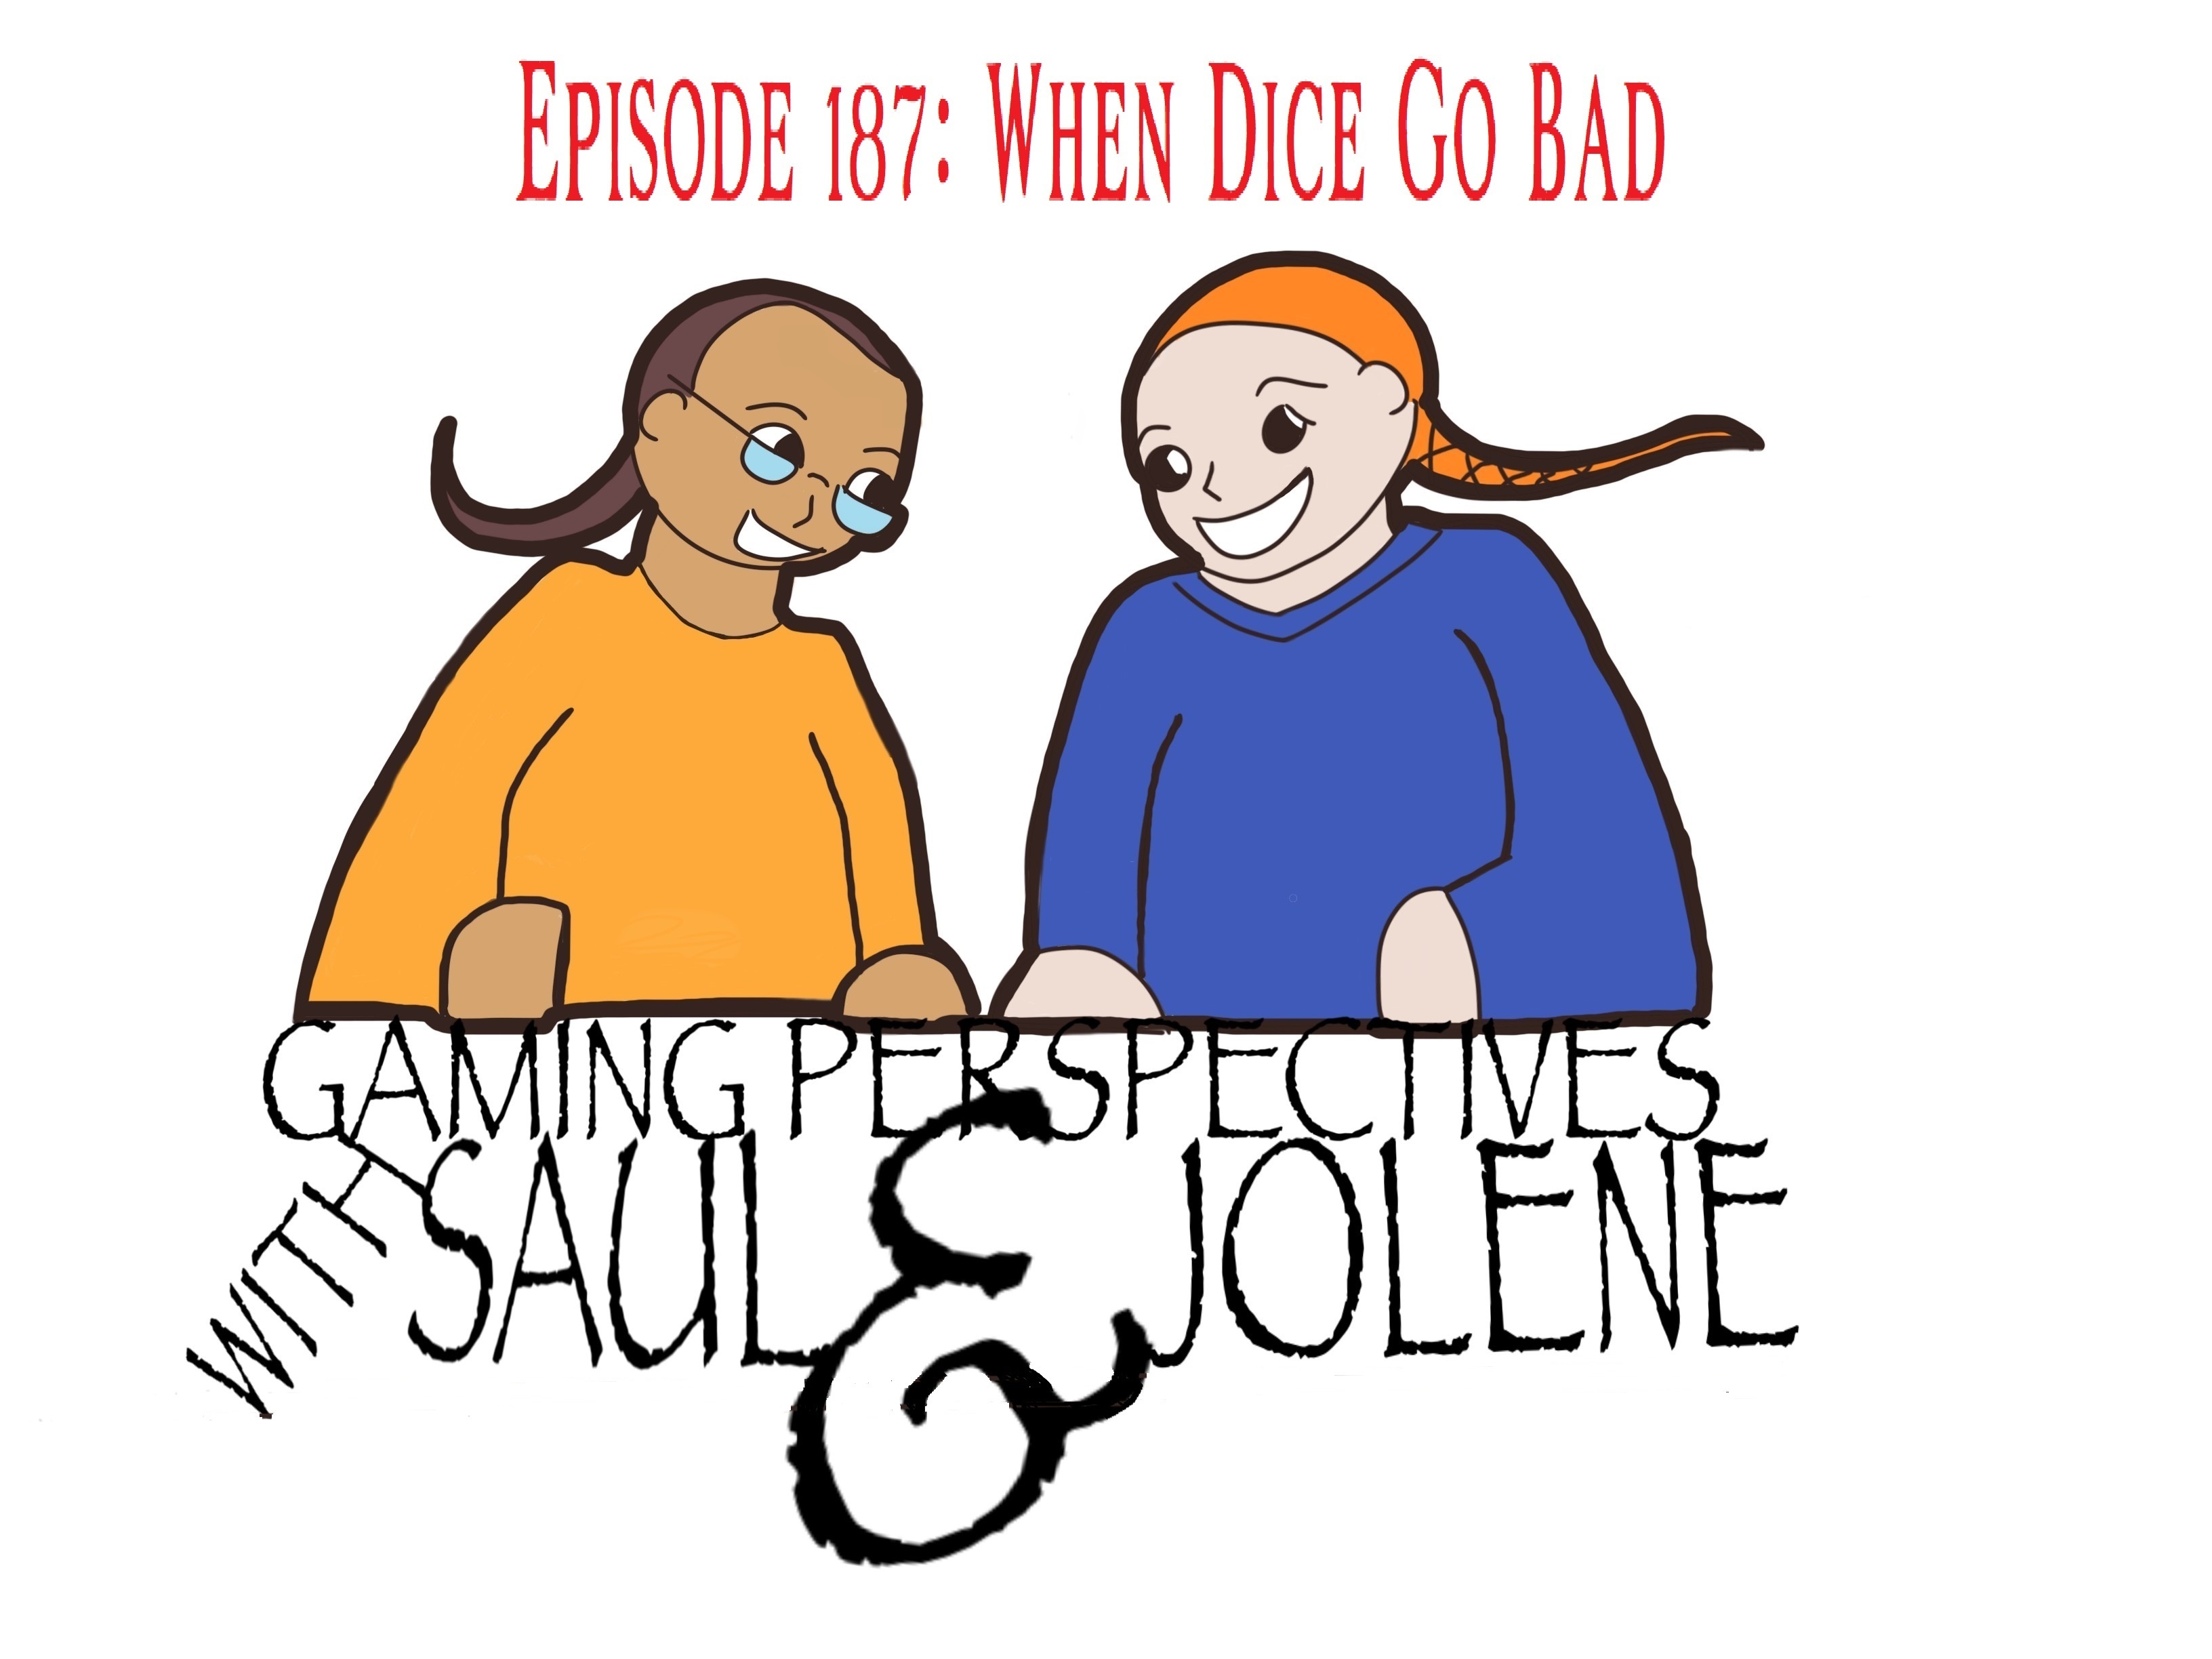 Episode 187: When Dice Go Bad, Gaming Perspectives with Saul and Jolene